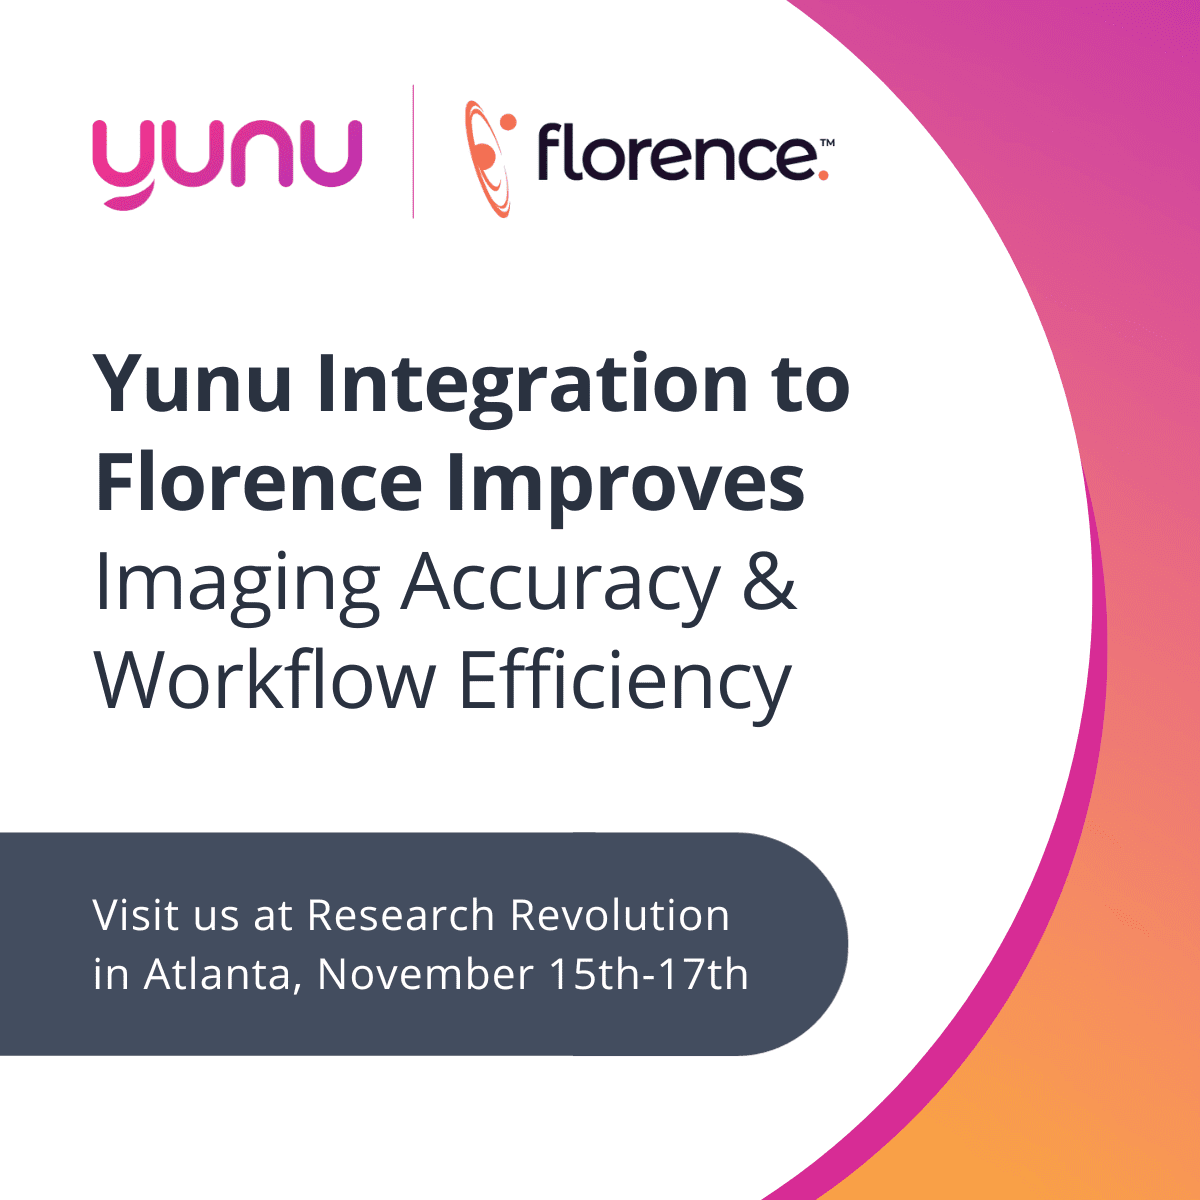 Yunu Integration to Florence Improves Imaging Accuracy and Workflow Efficiency